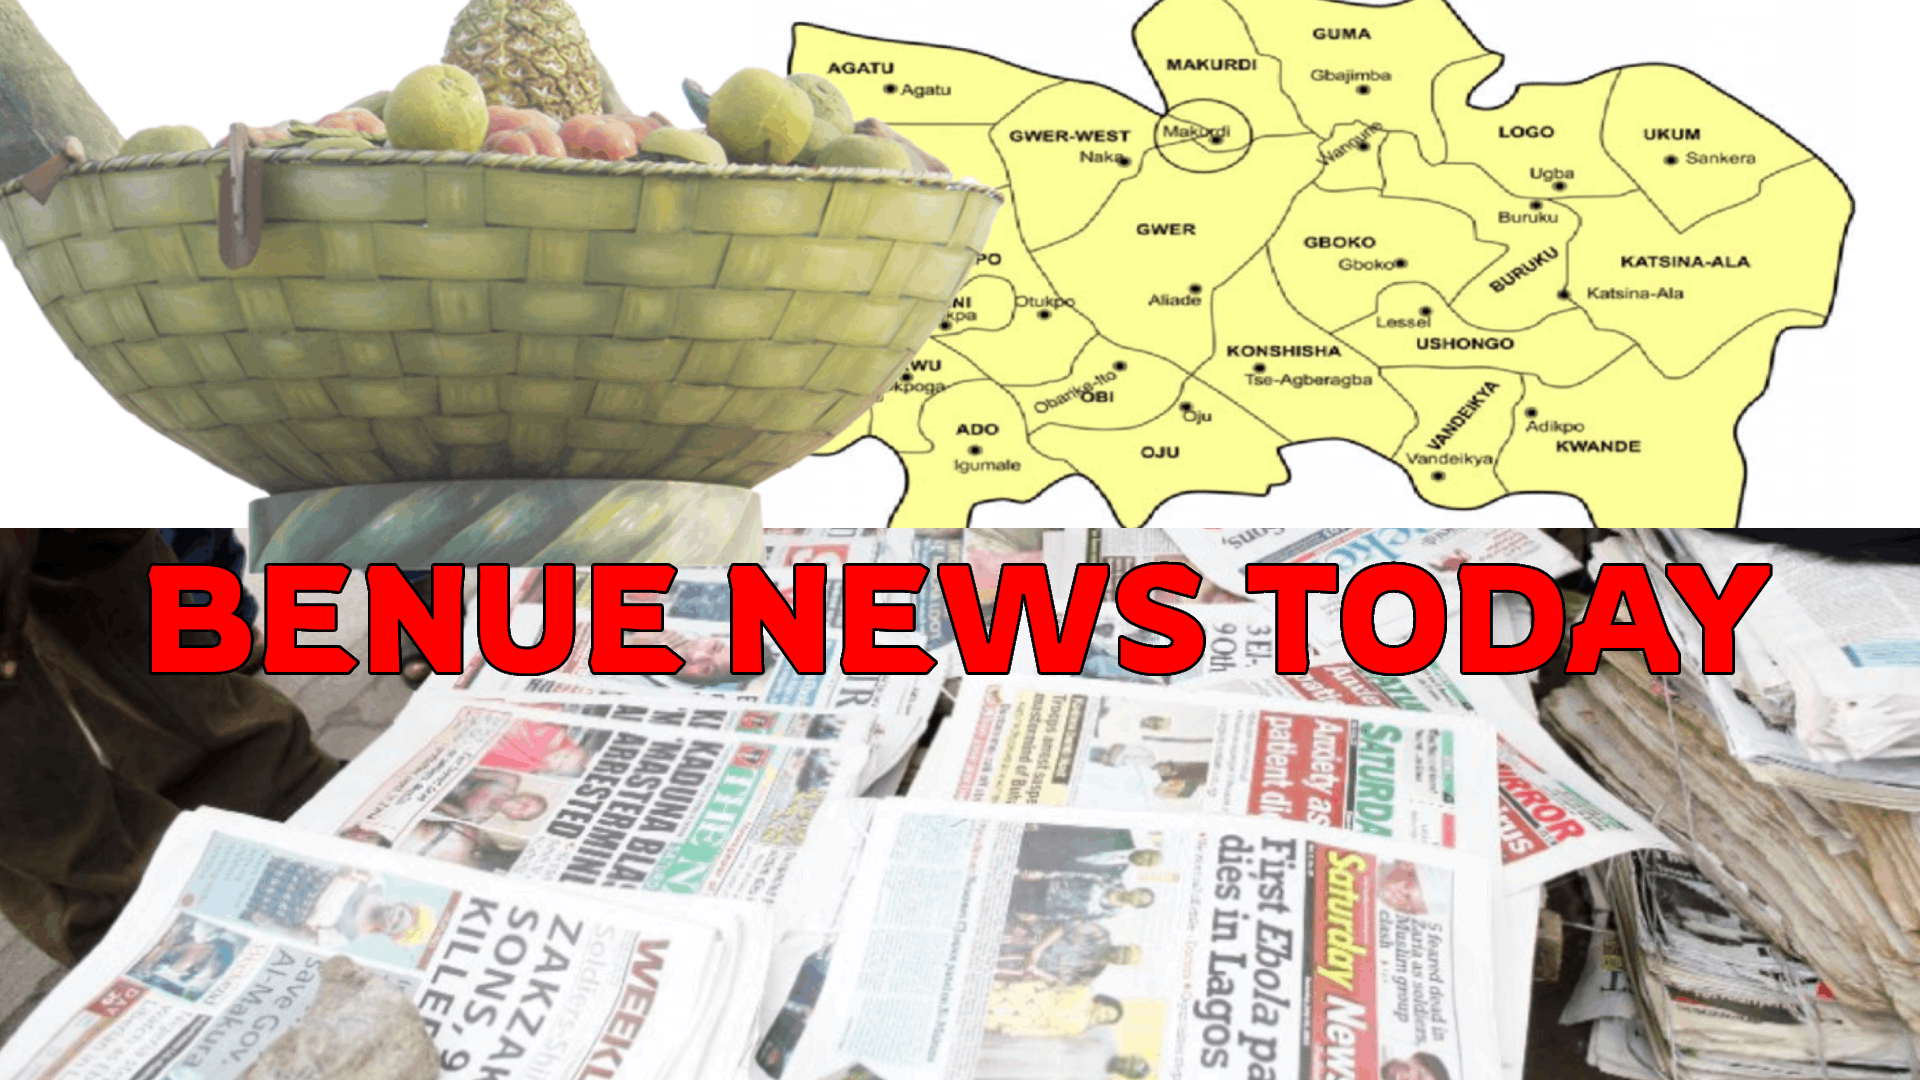 Latest Benue News today, Monday, August 8 2022